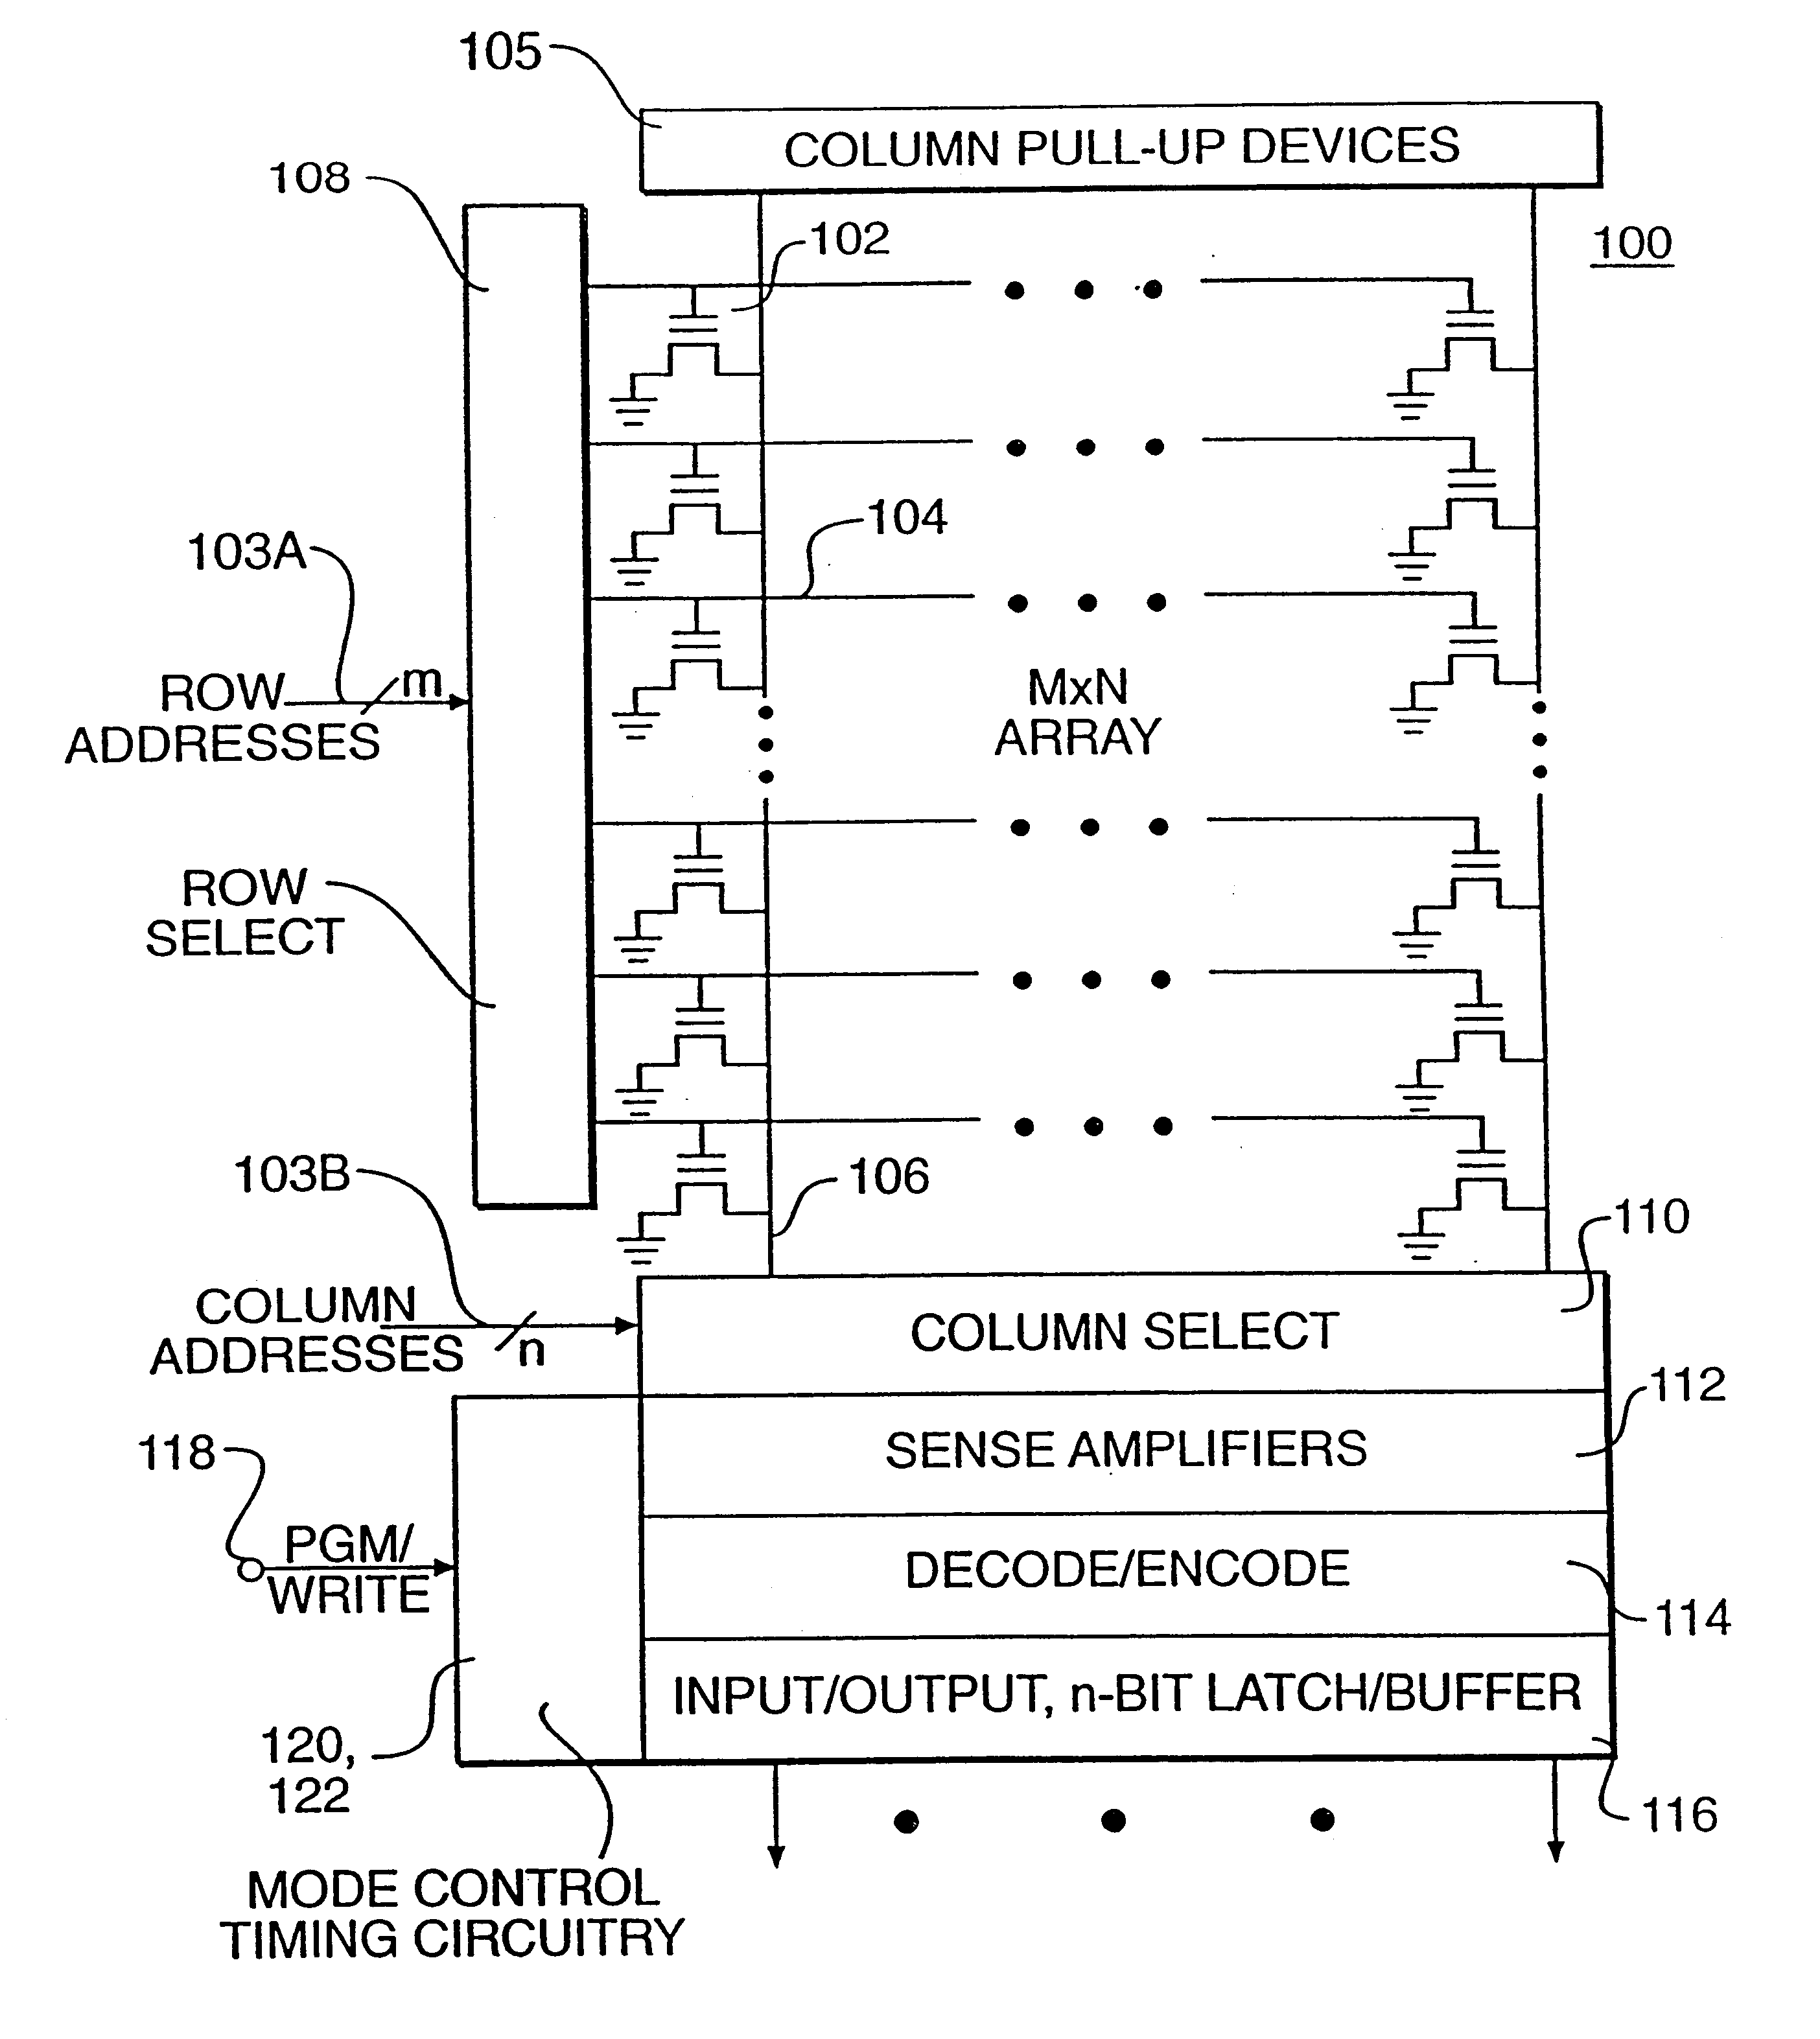 Memory apparatus including programmable non-volatile multi-bit memory cell, and apparatus and method for demarcating memory states of the cell